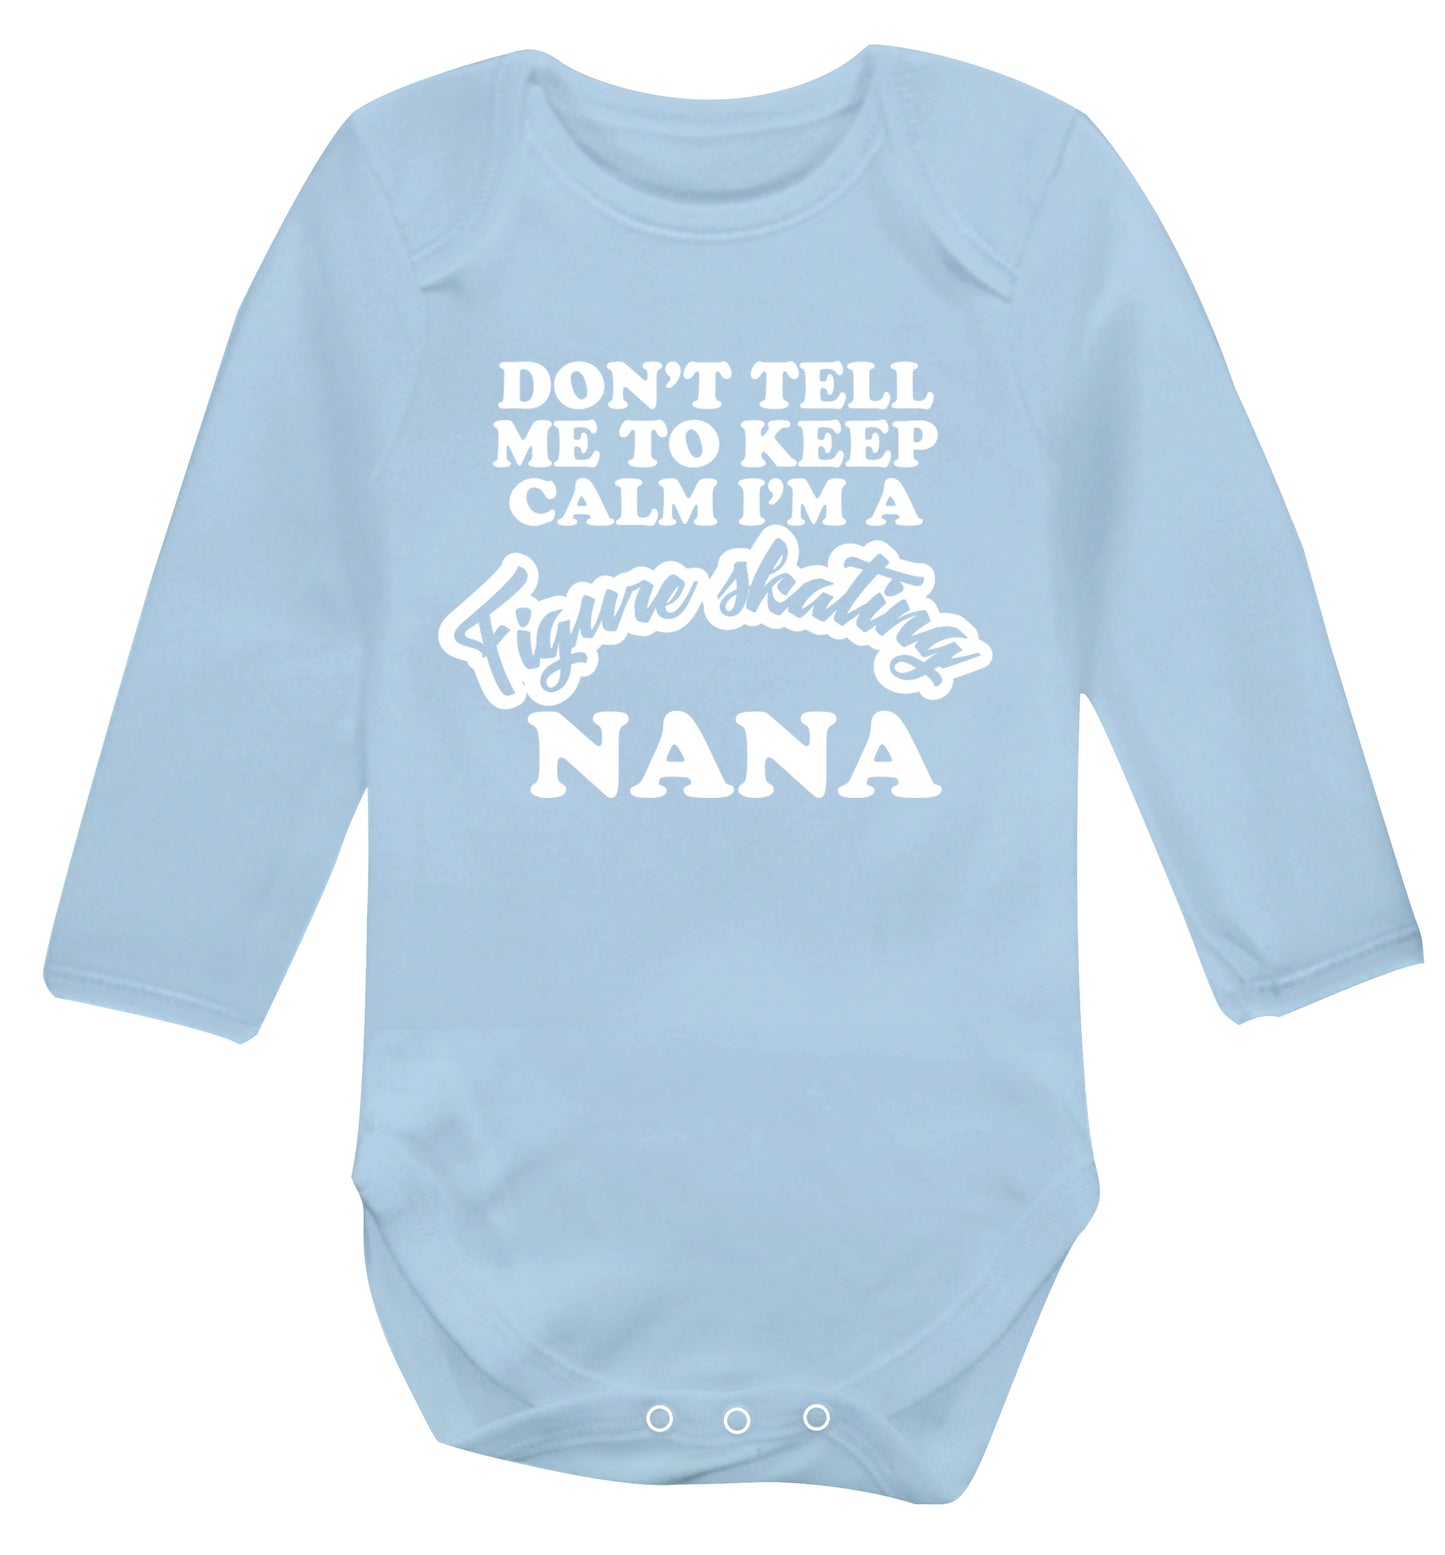 Don't tell me to keep calm I'm a figure skating nana Baby Vest long sleeved pale blue 6-12 months